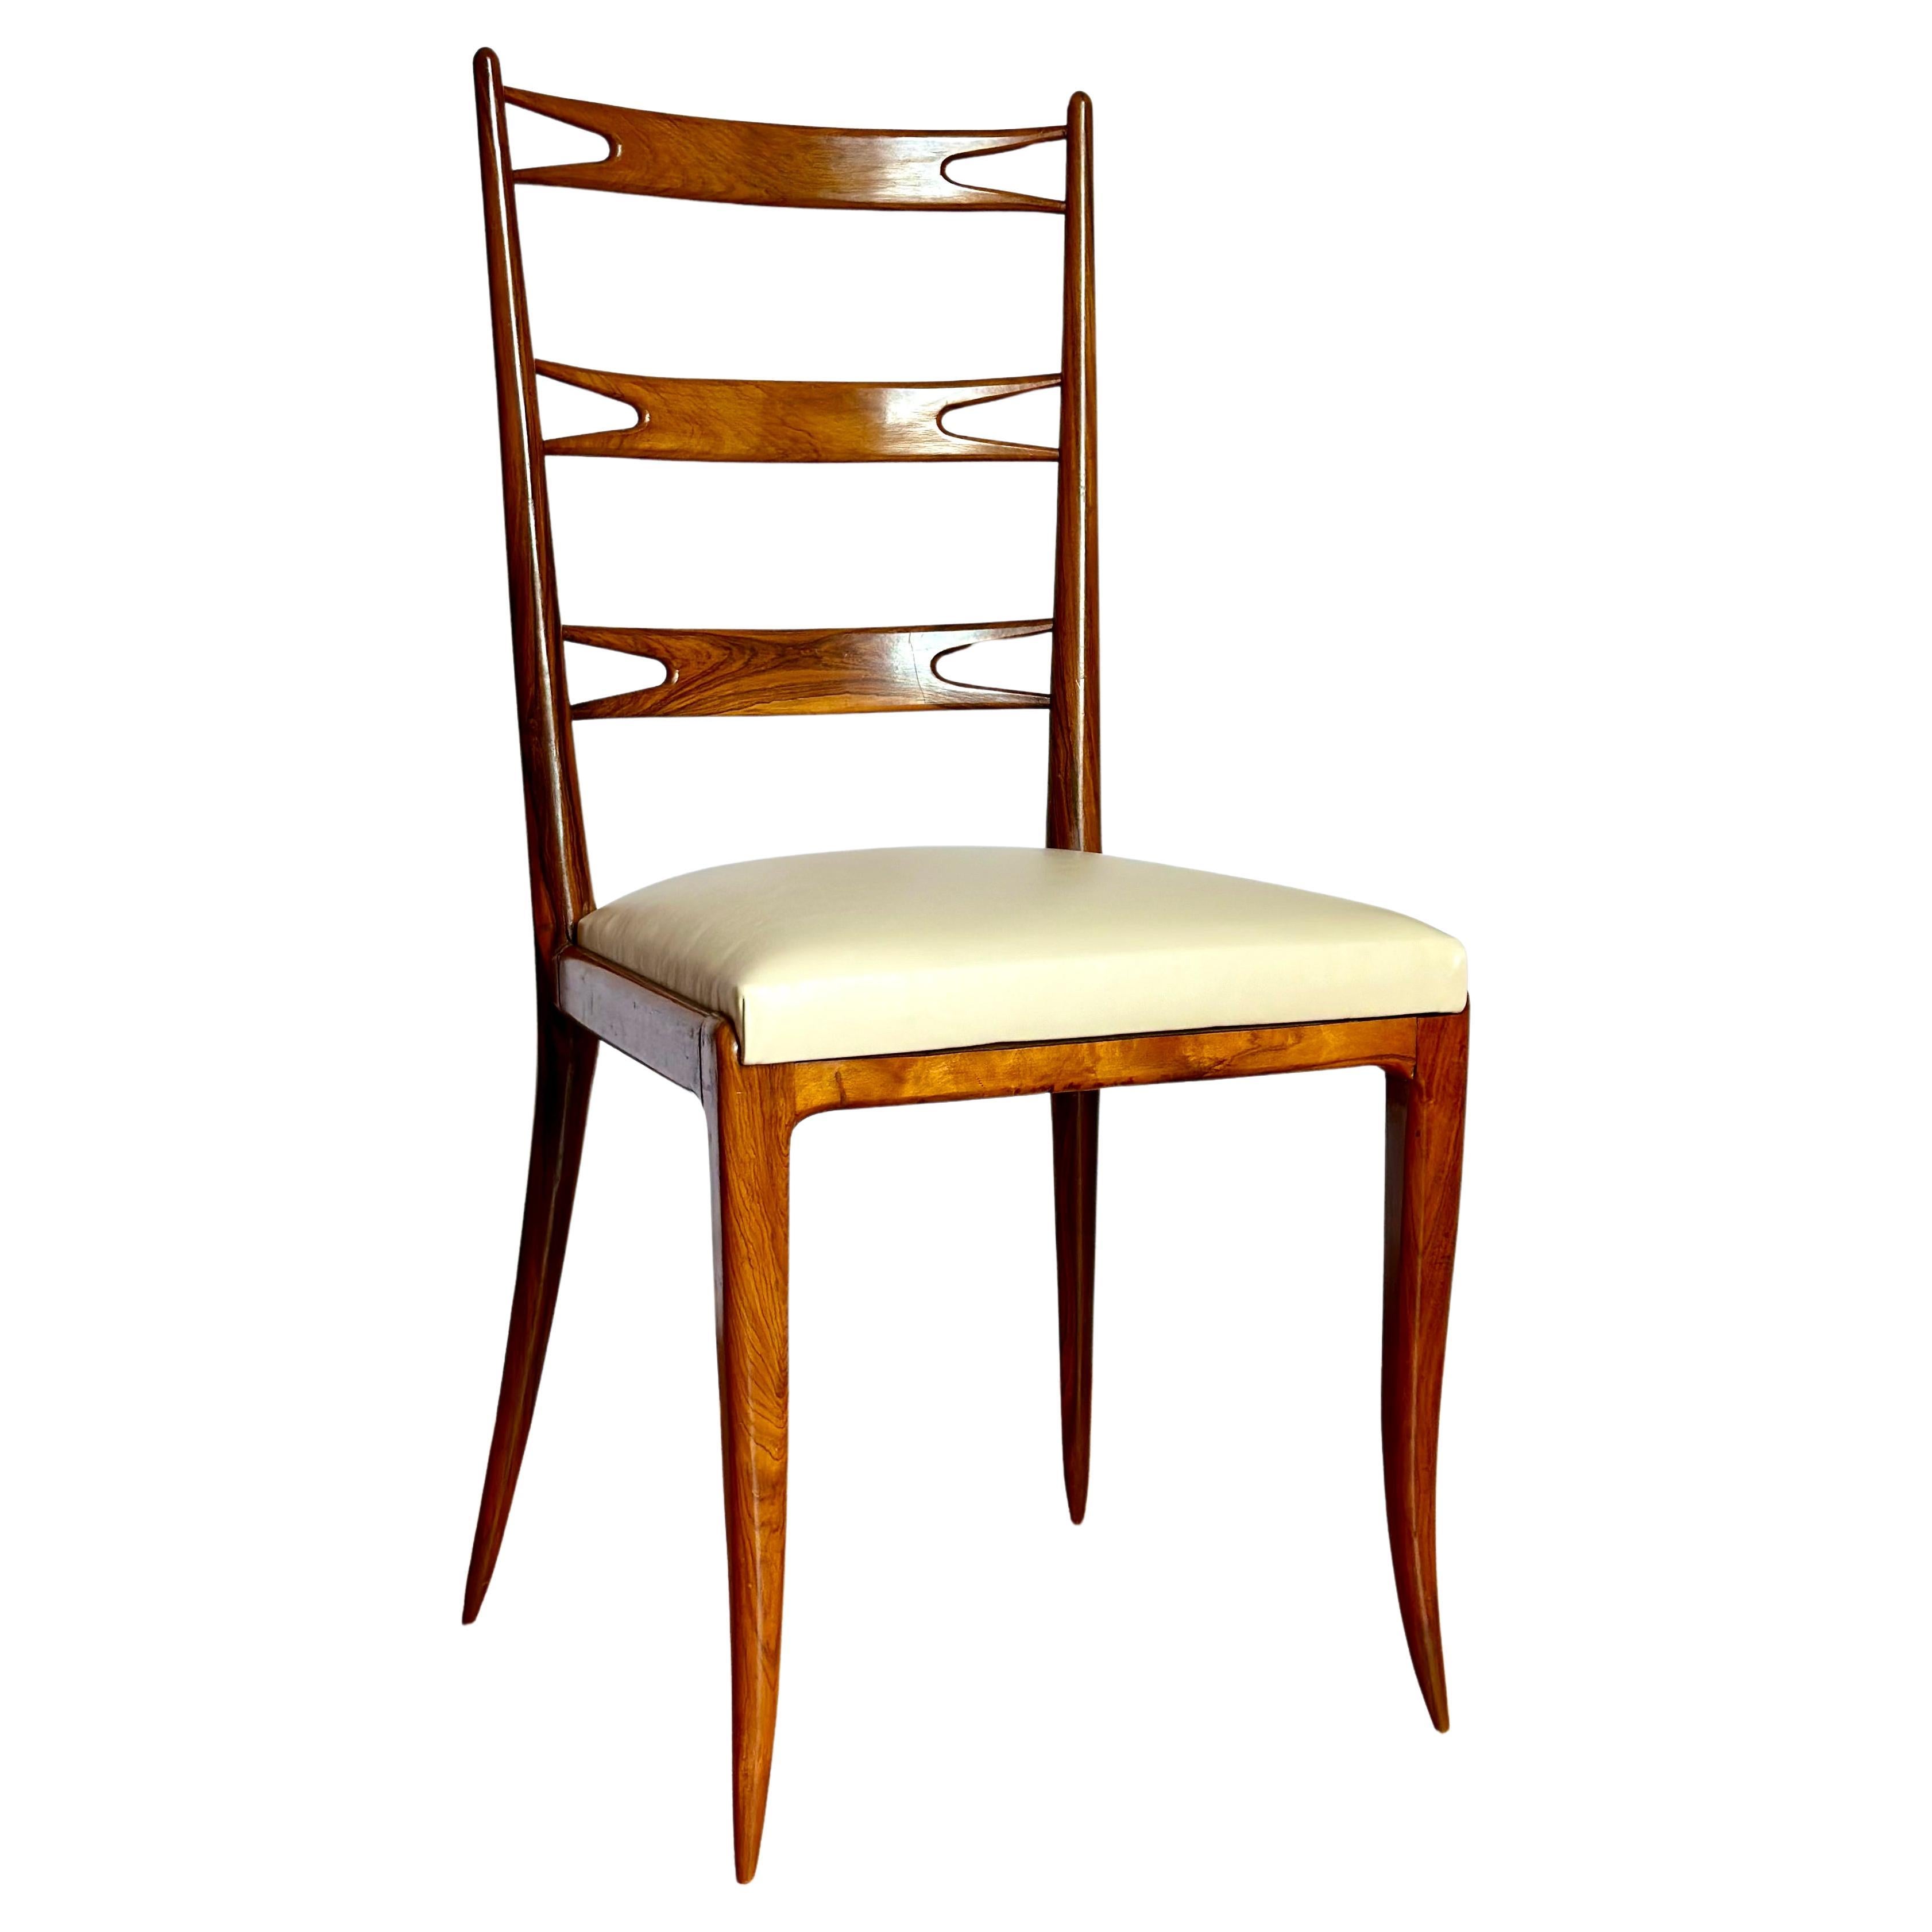 Giuseppe Scapinelli Brazilian Modern Chair in Caviuna Rosewood and Leather